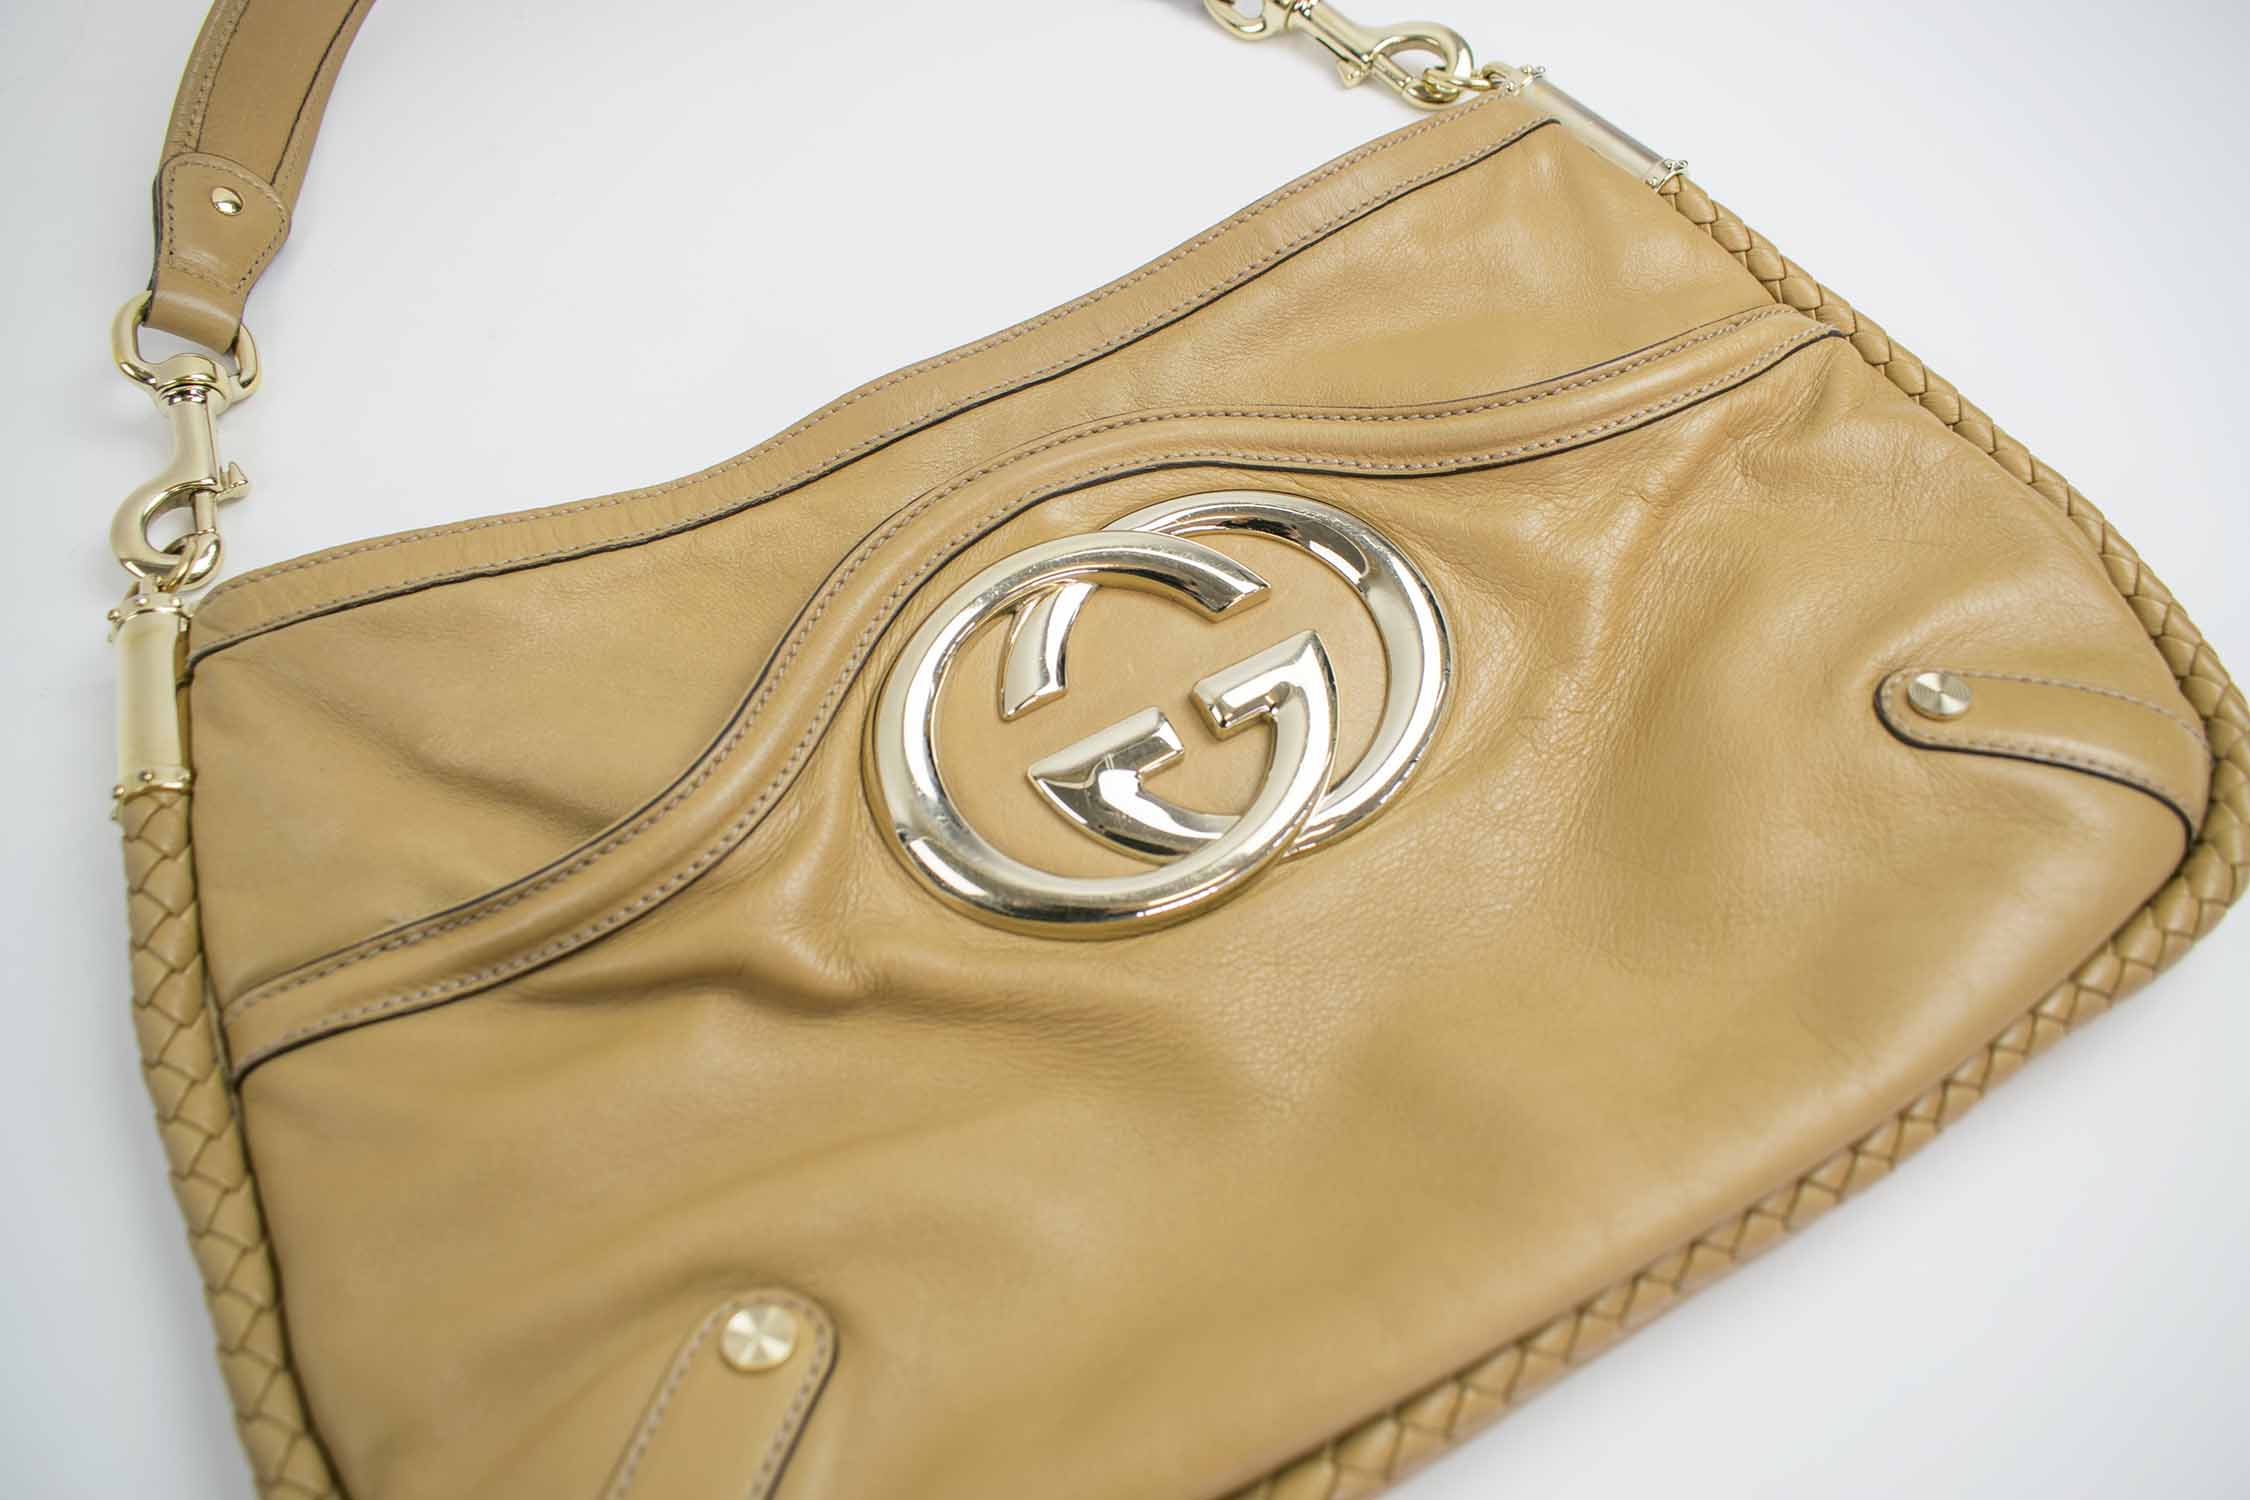 TORY BURCH SHOULDER BAG, with tortoiseshell chain strap, detail and  closure, gold tone hardware, accordion style, with botanical pattern and  mirror inside, fabric lining and tan leather interior, 22cm x 16cm H.